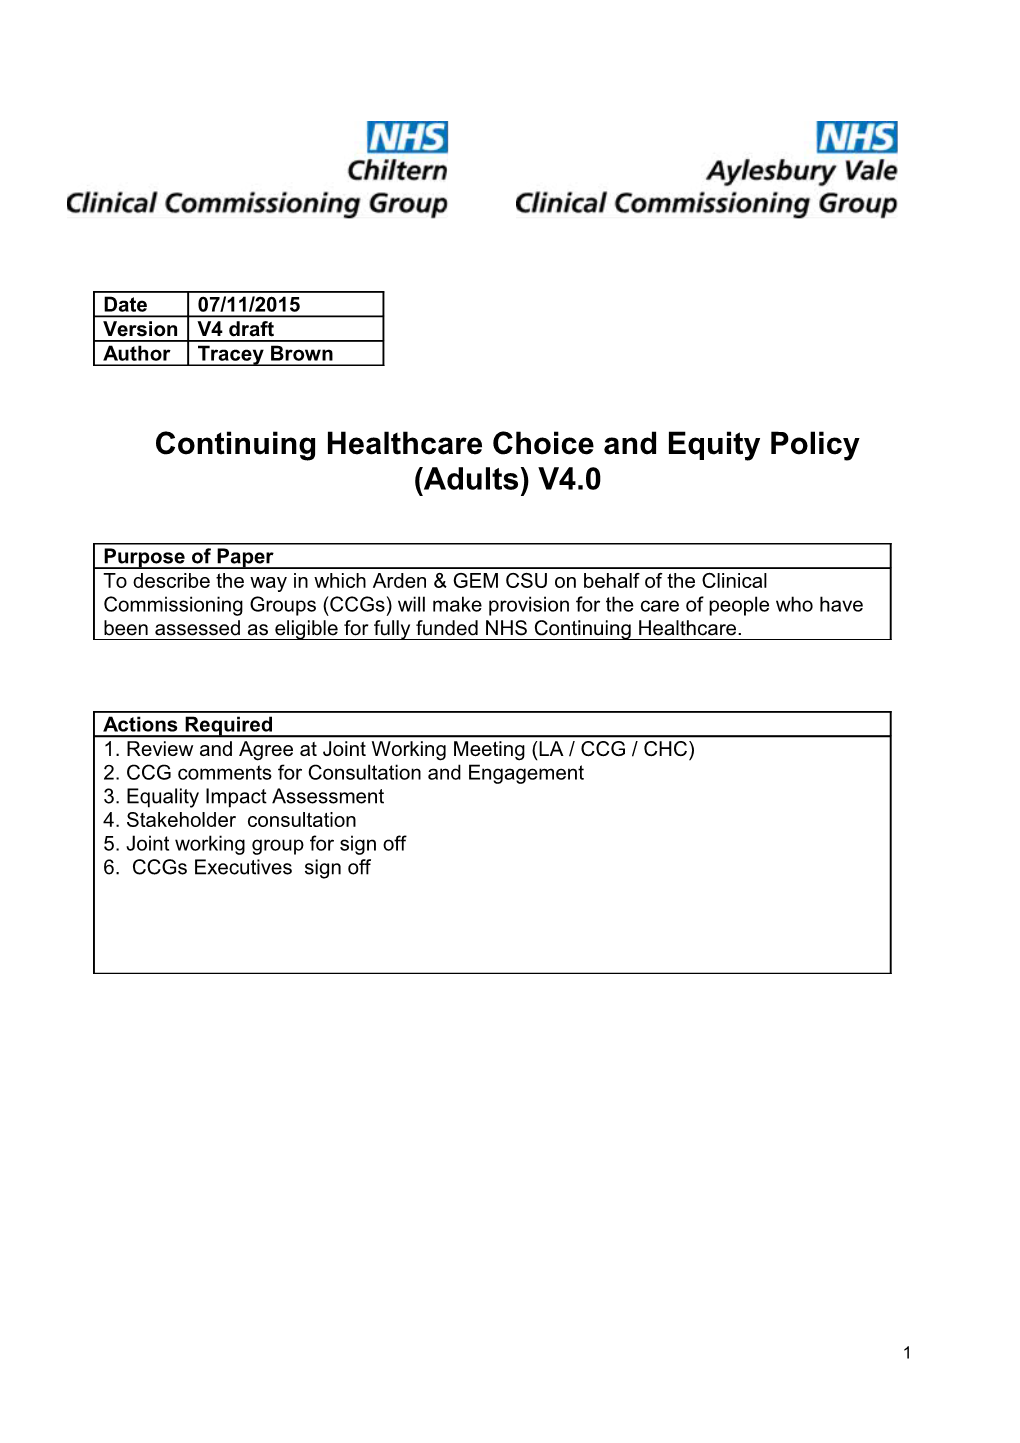 Continuing Healthcare Choice and Equity Policy (Adults) V4.0